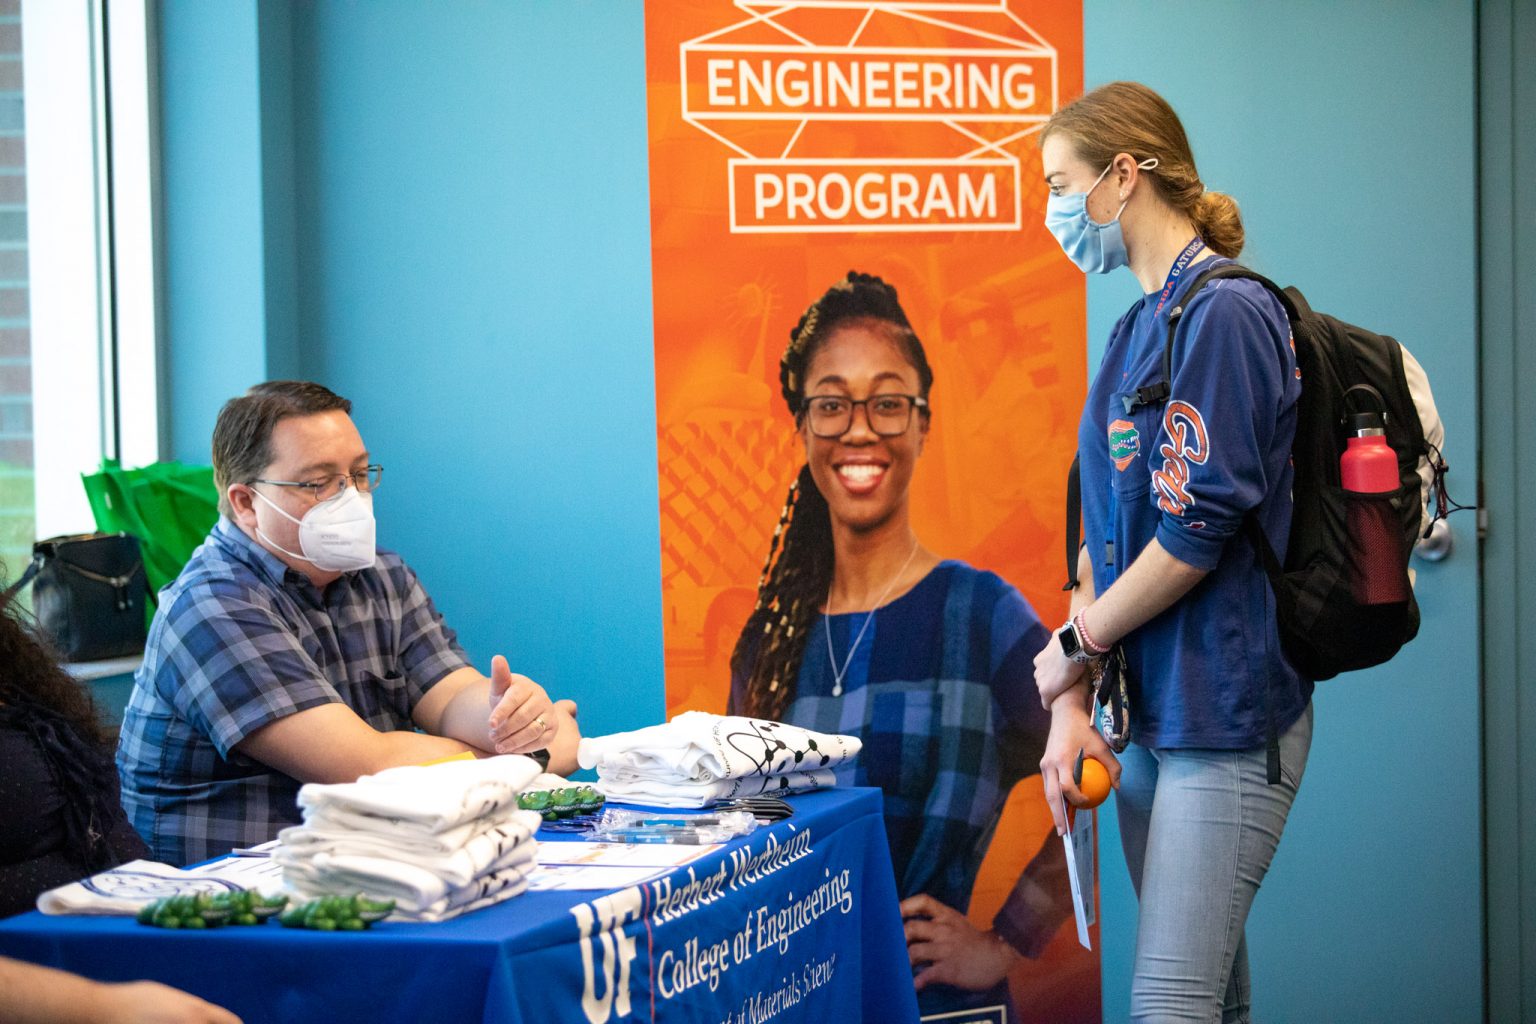 Career Showcase launches new experience for UF students DIVISION OF